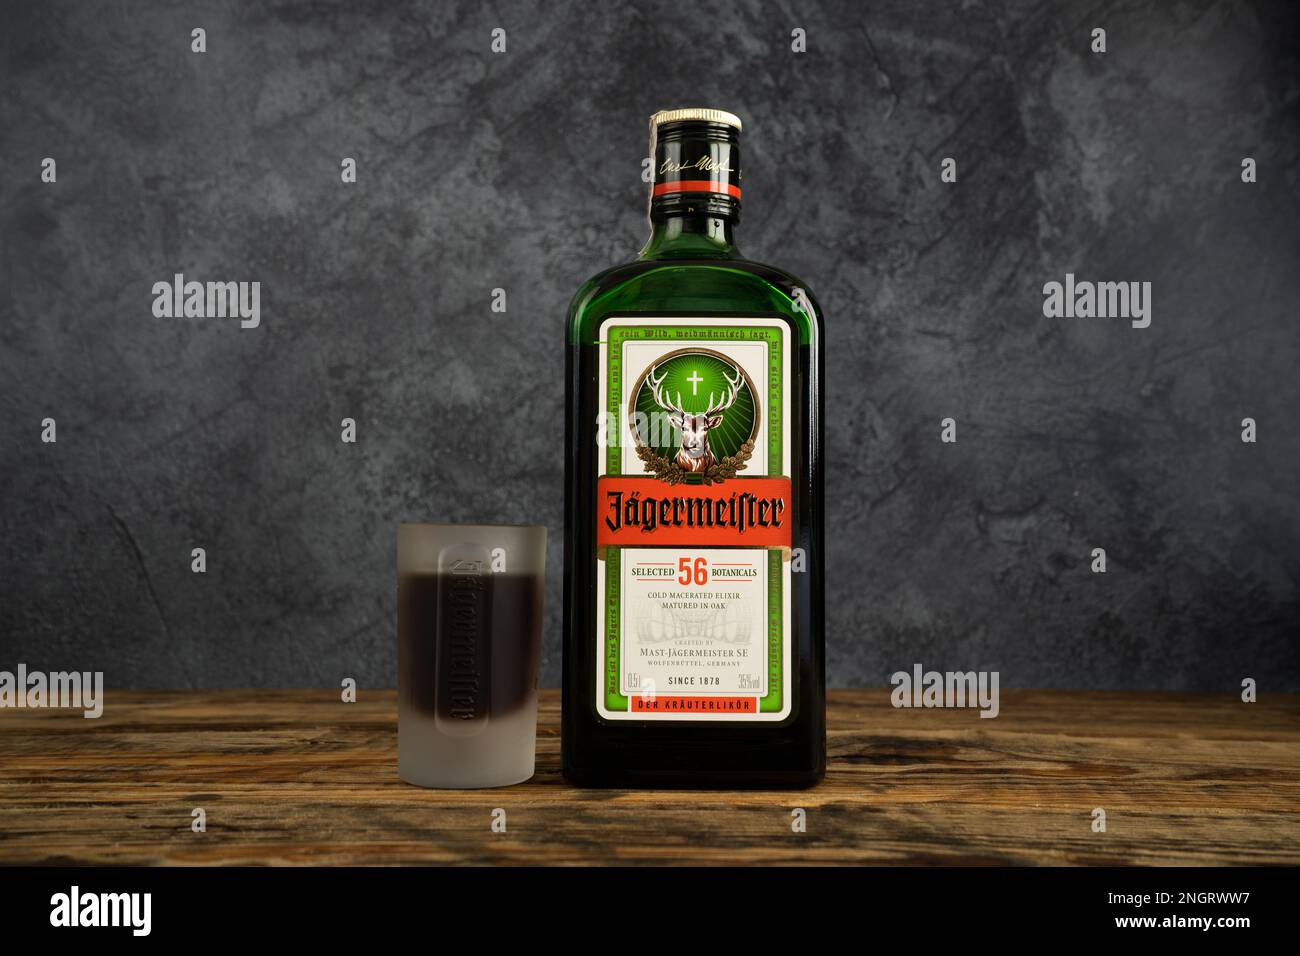 Jägermeister bottle and shot glass. German digestive alcohol drink (digestif). Jagermeister liqueur made with 56 herbs and spices. Stock Photo